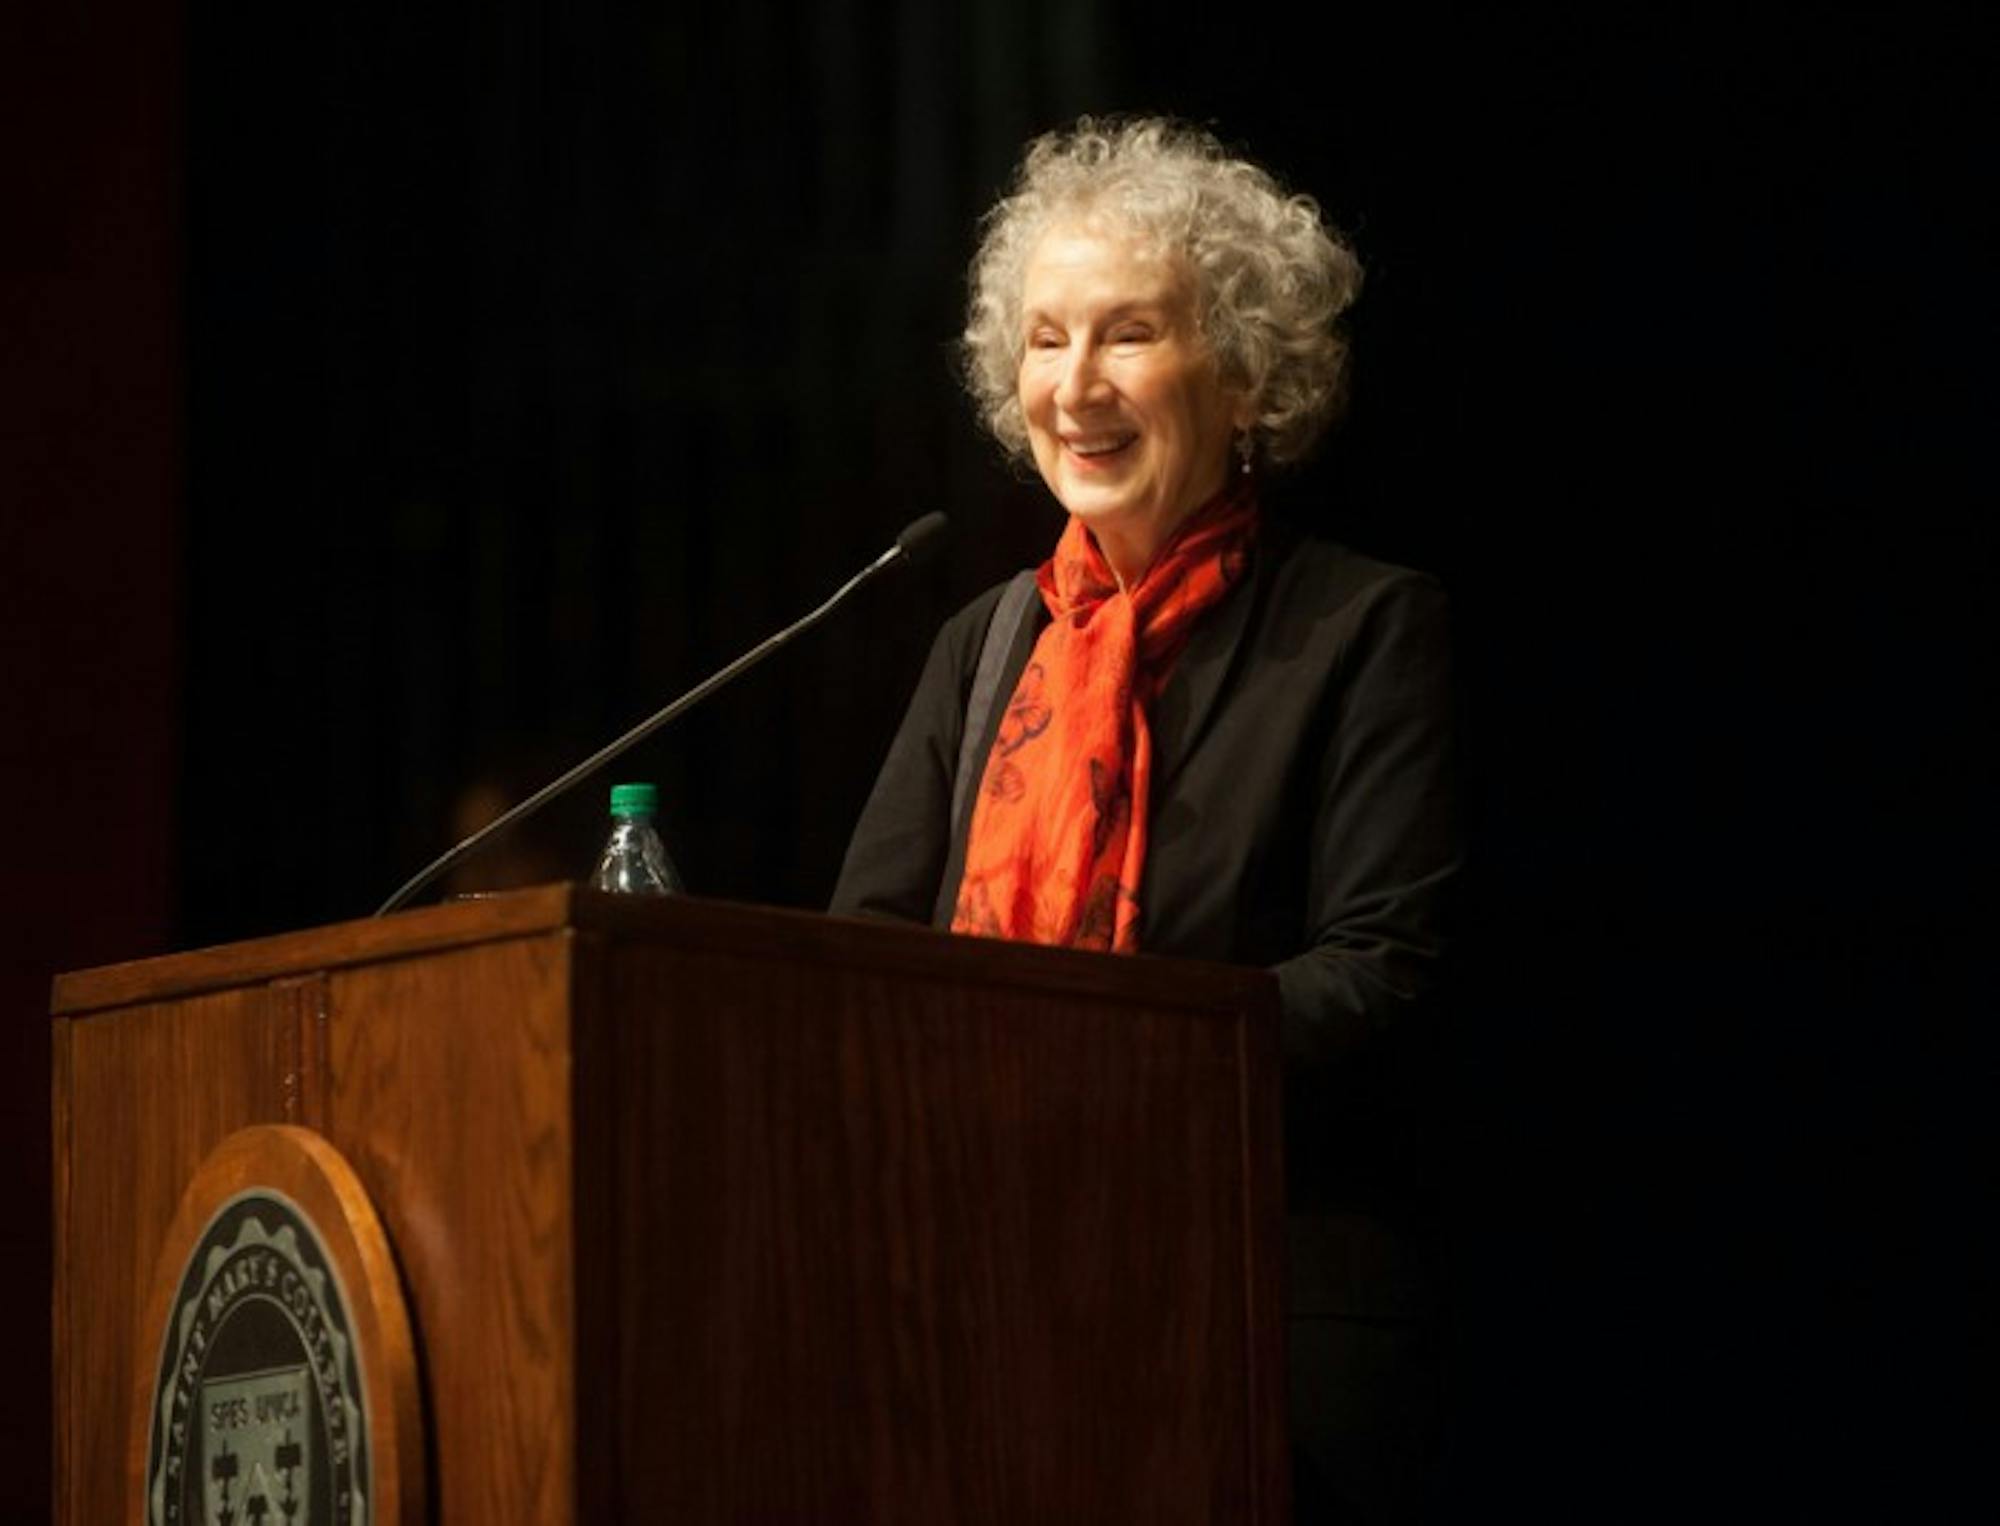 Margaret Atwood engages with the crowd at her lecture at Saint Mary's Wednesday evening. In an interview, Atwood stressed the importance of liberal arts and the humanities.